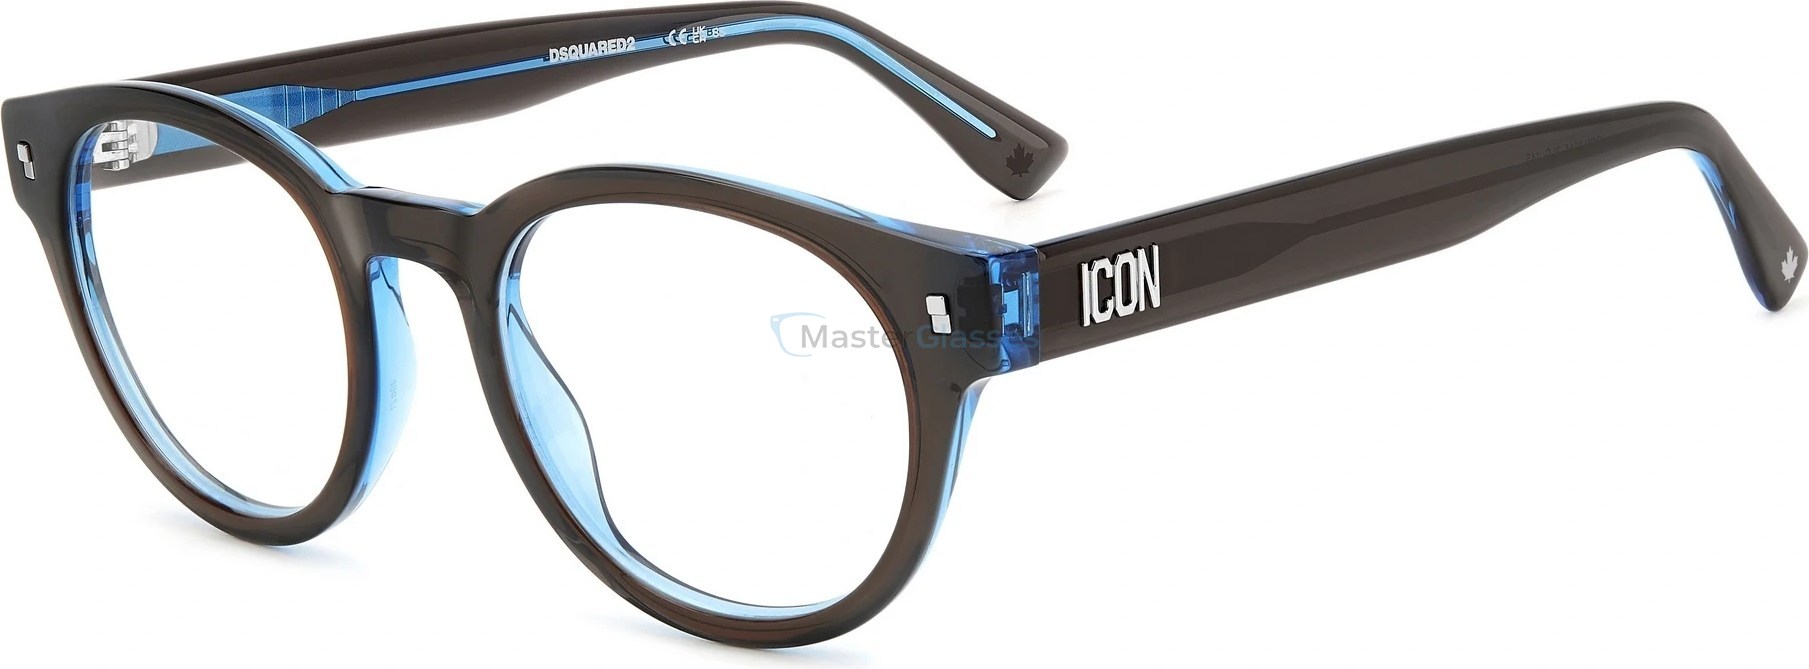  DSQUARED2 ICON 0014 3LG BROWNBLUE